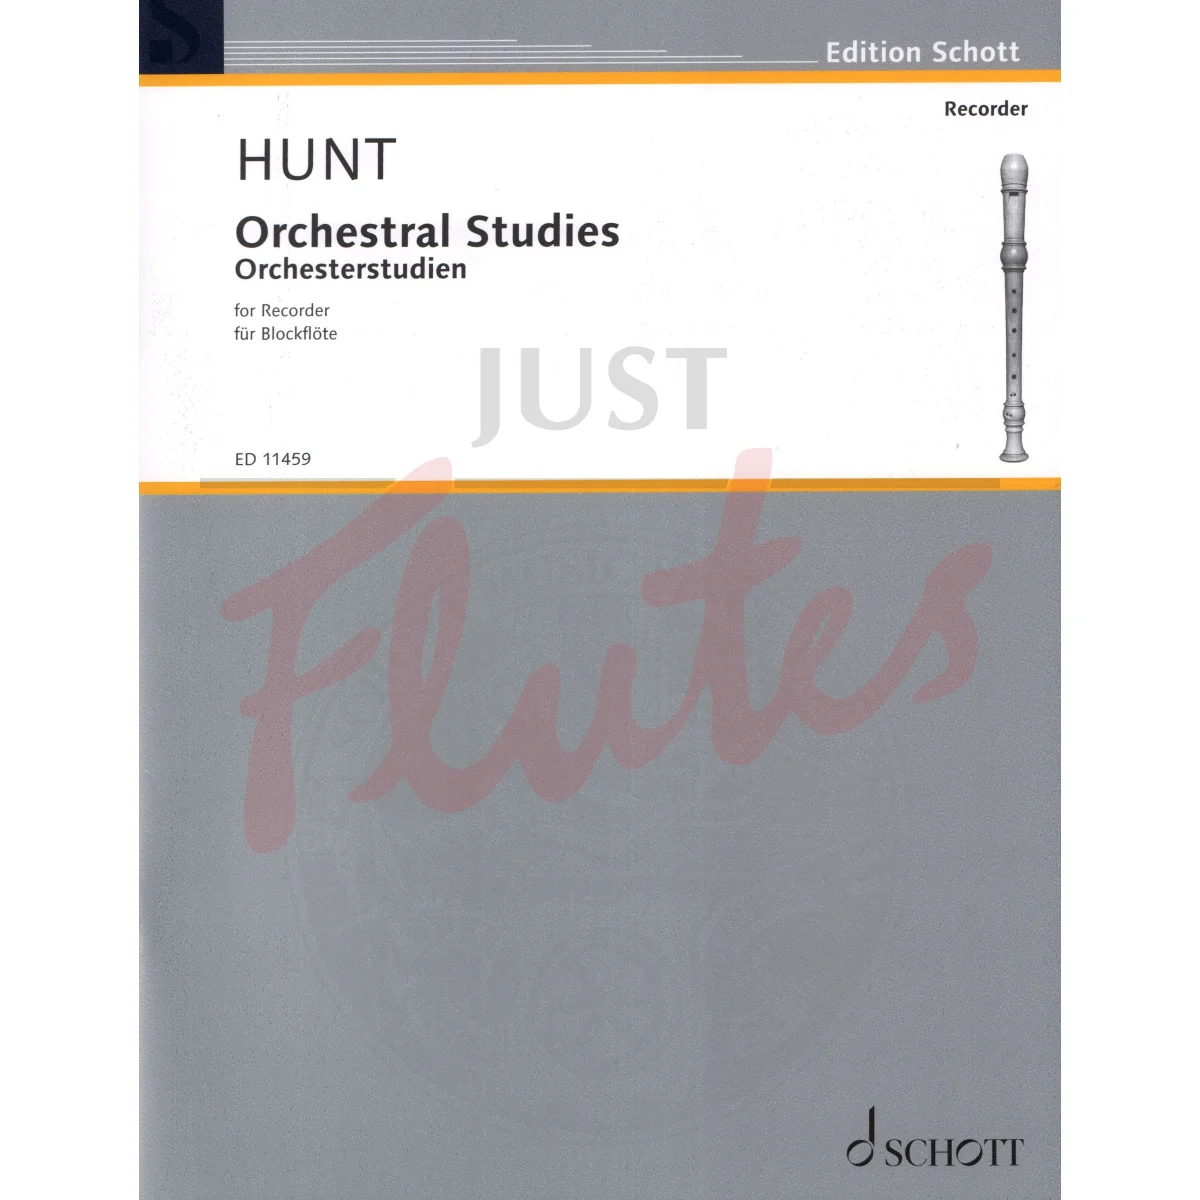 Orchestral Studies for Recorder